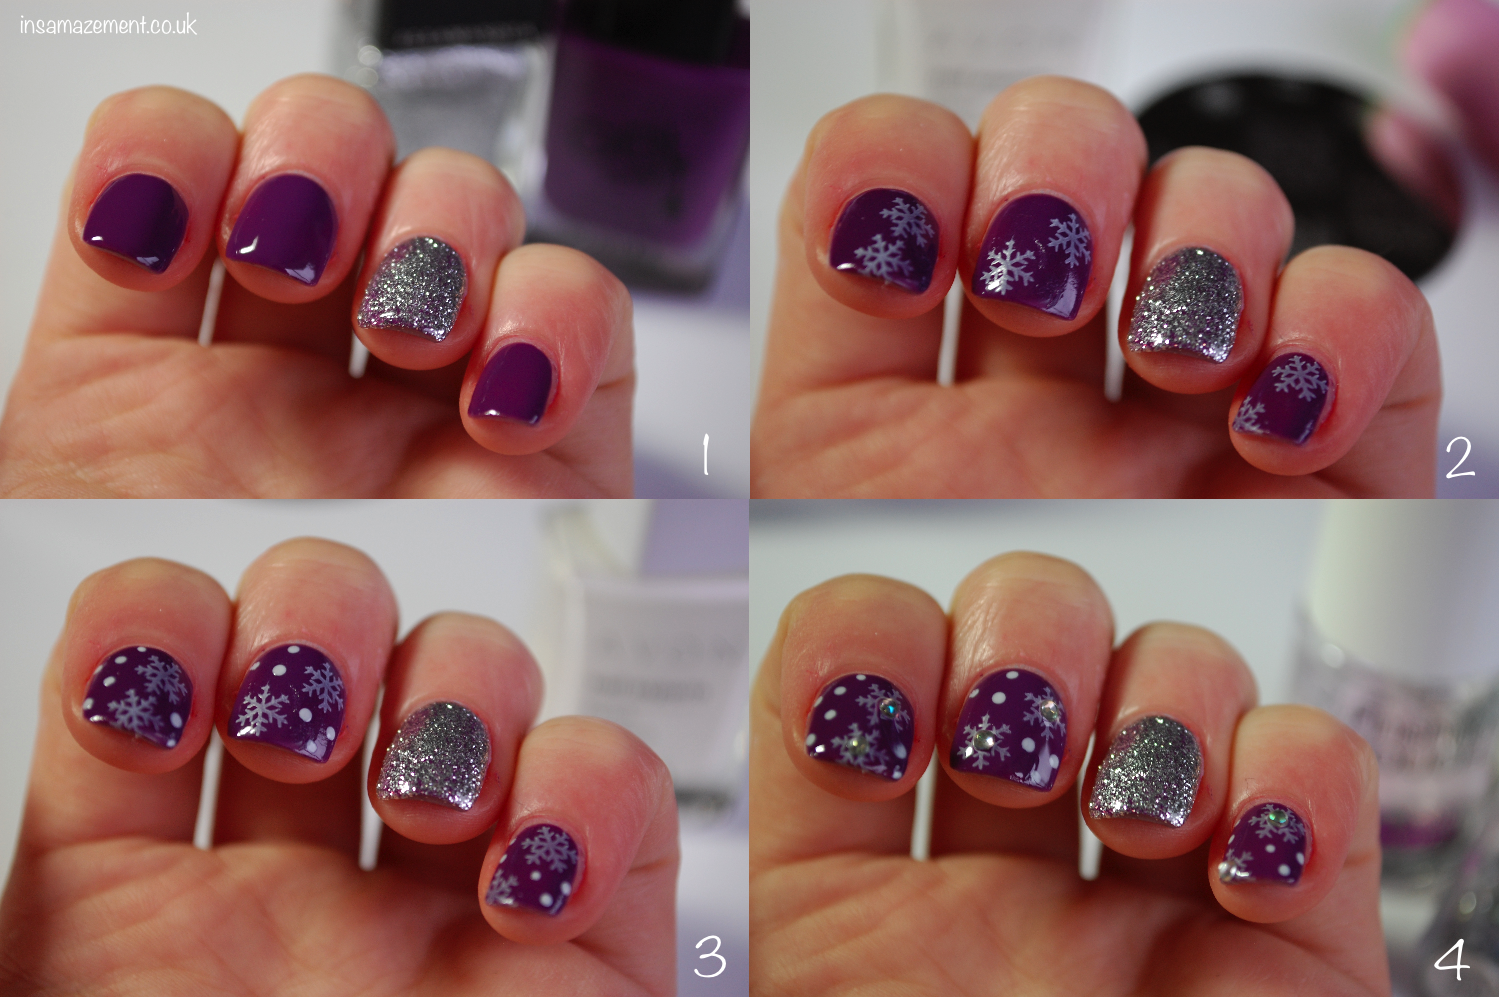 1. Snowflake Nail Art Tutorial with Toothpick - wide 10